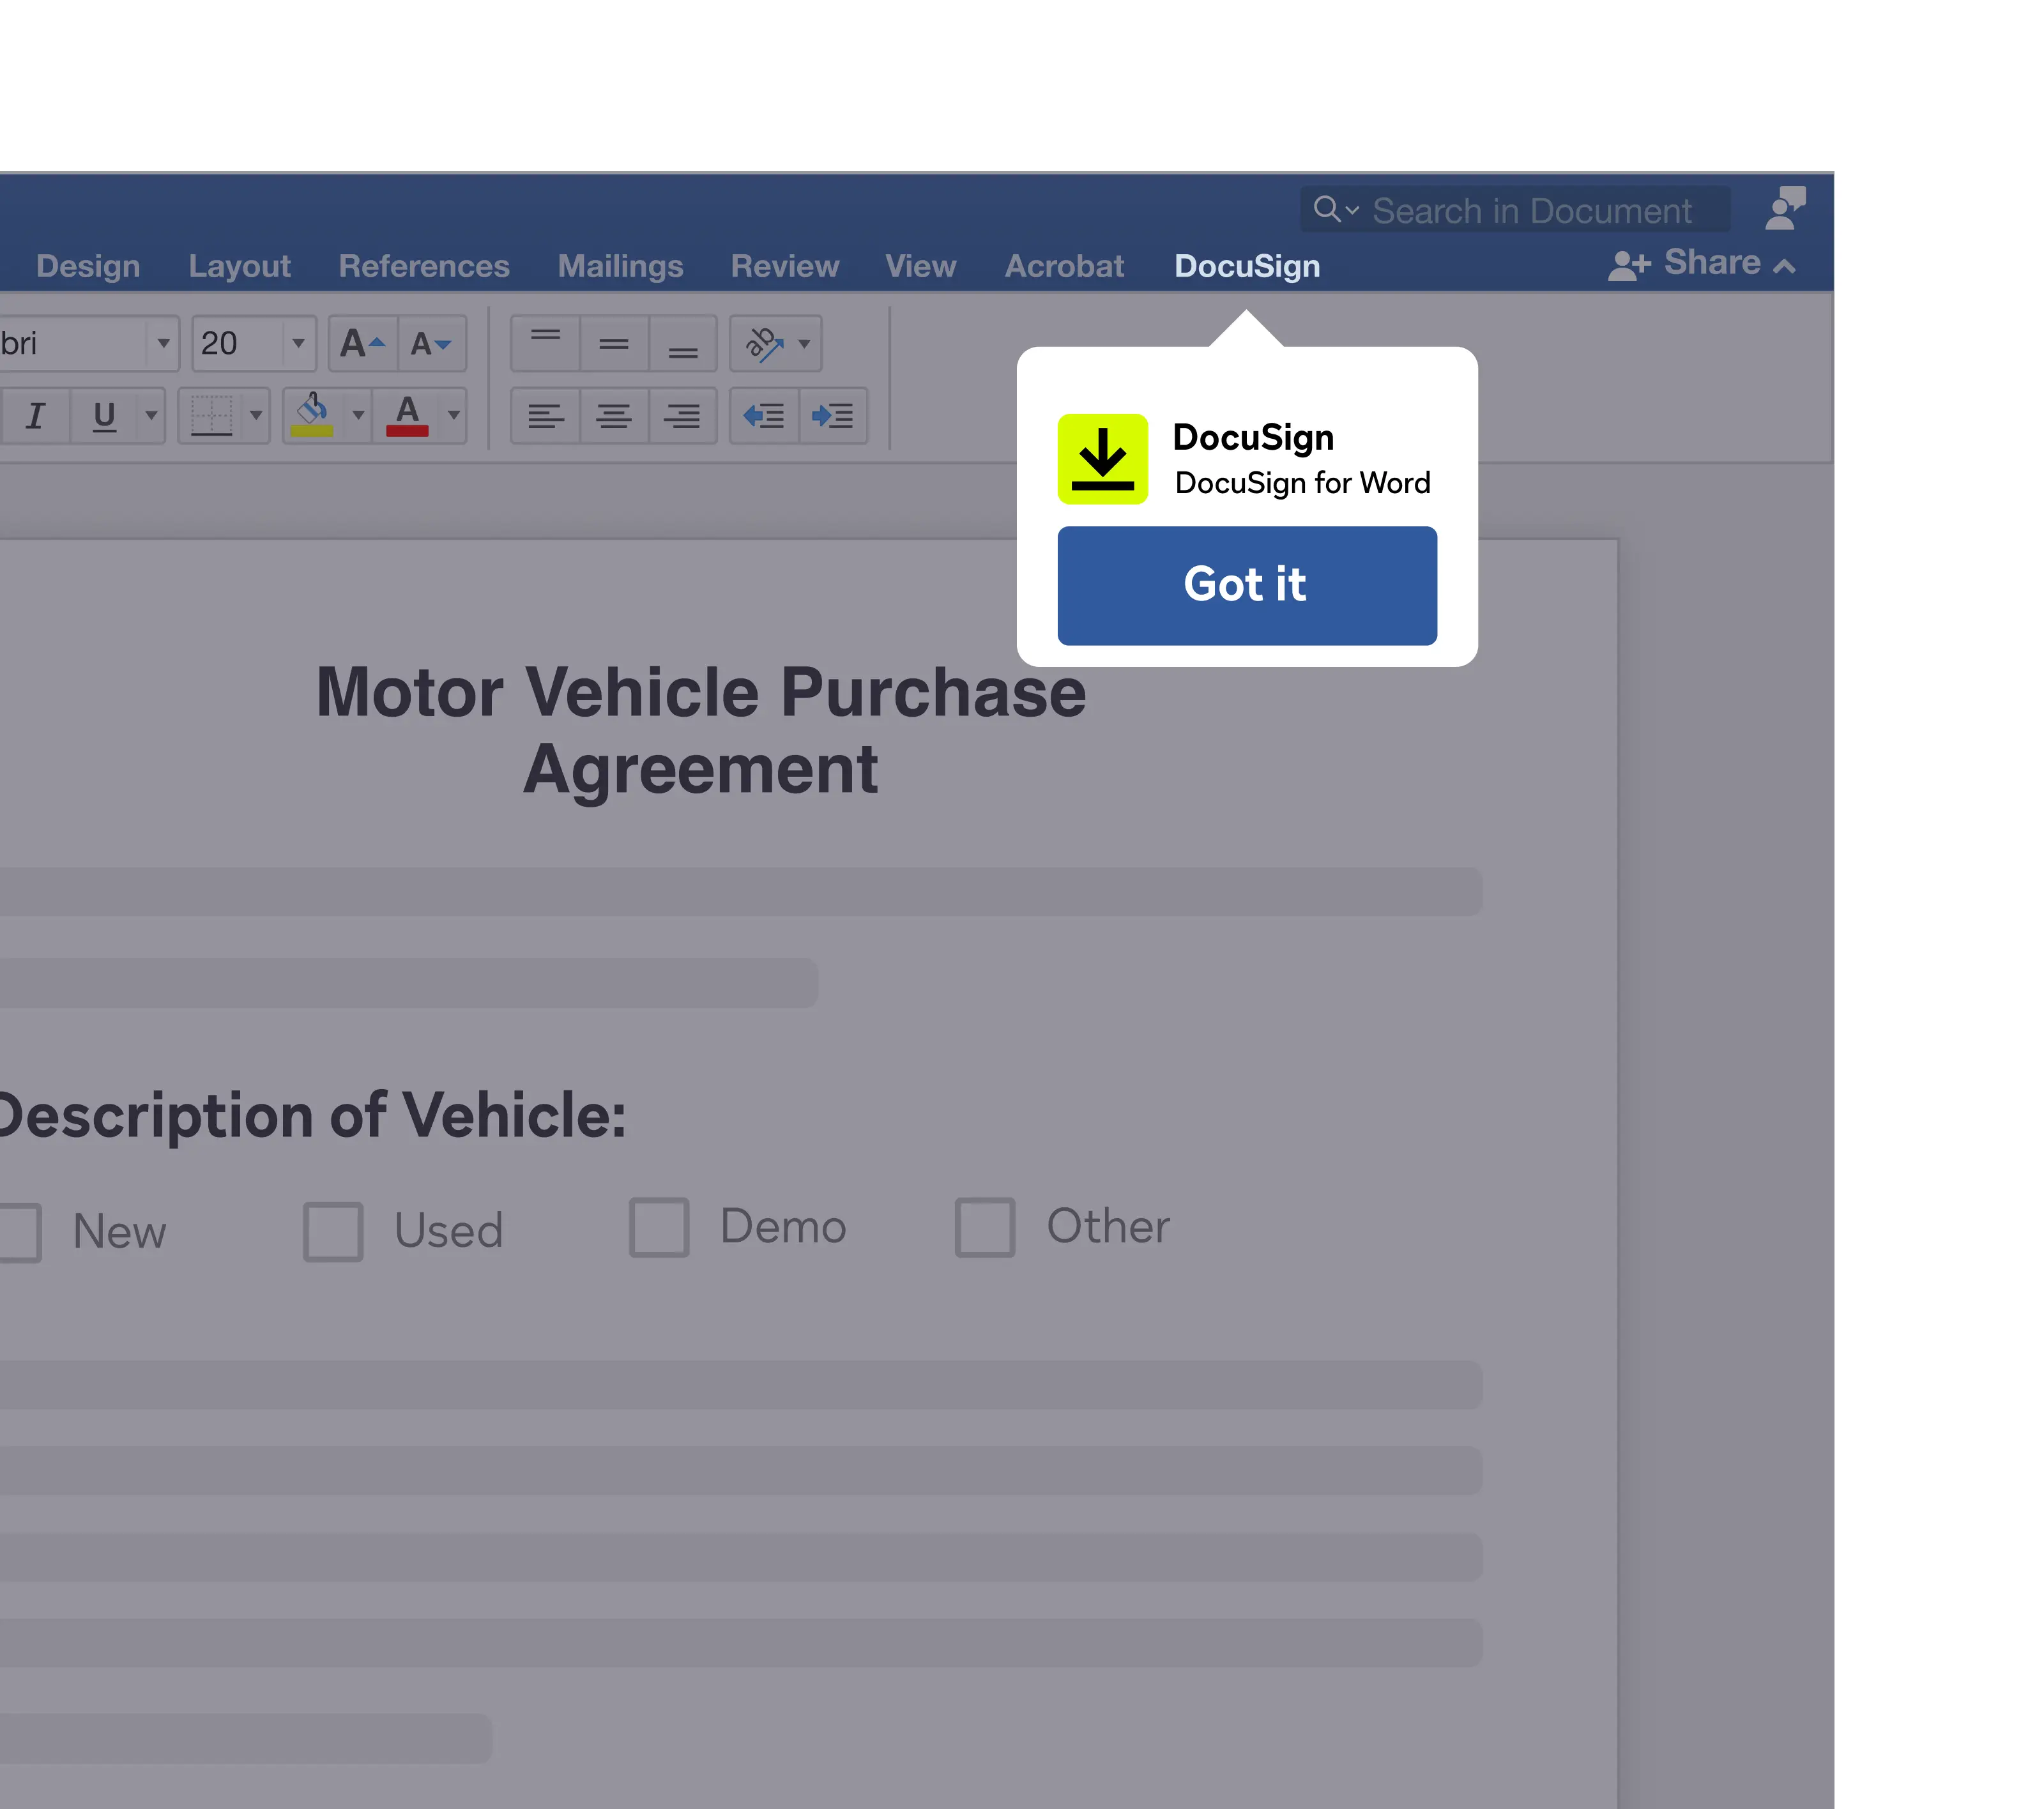 A screenshot of accessing DocuSign for Word on the go